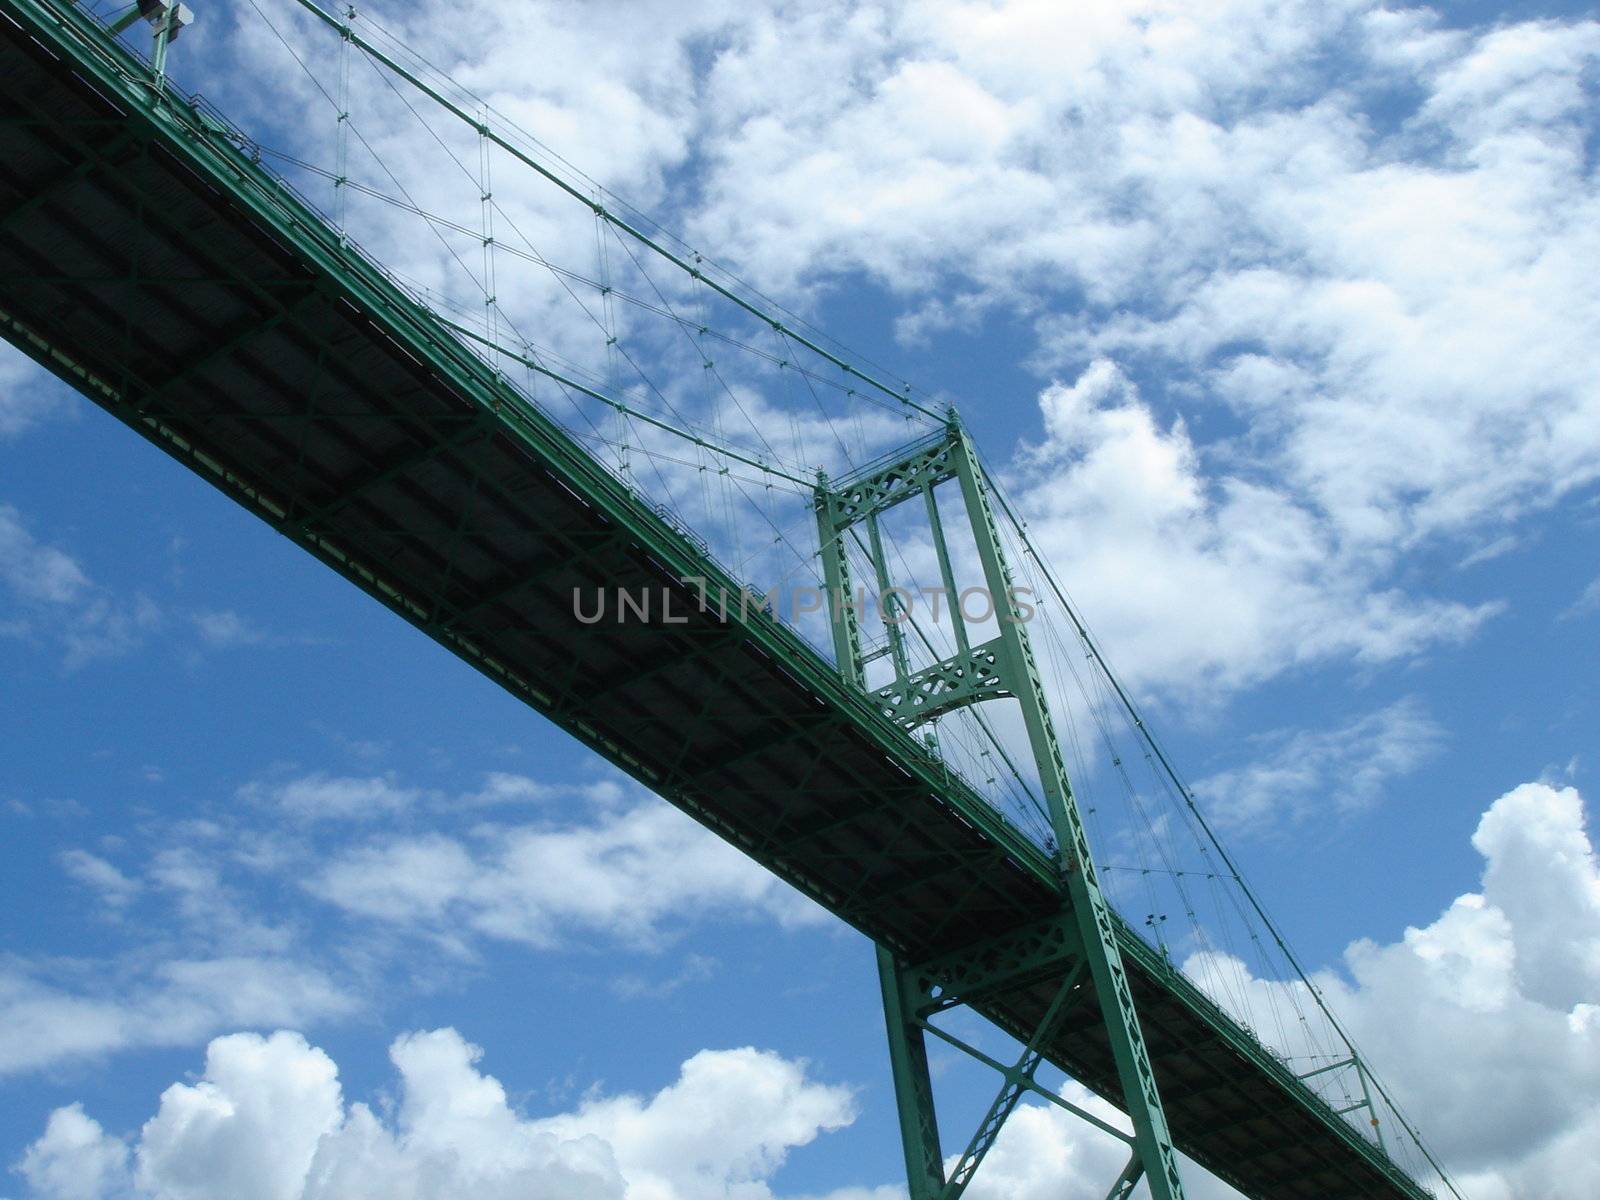 Structure of a bridge viewed from under by cloudy weather